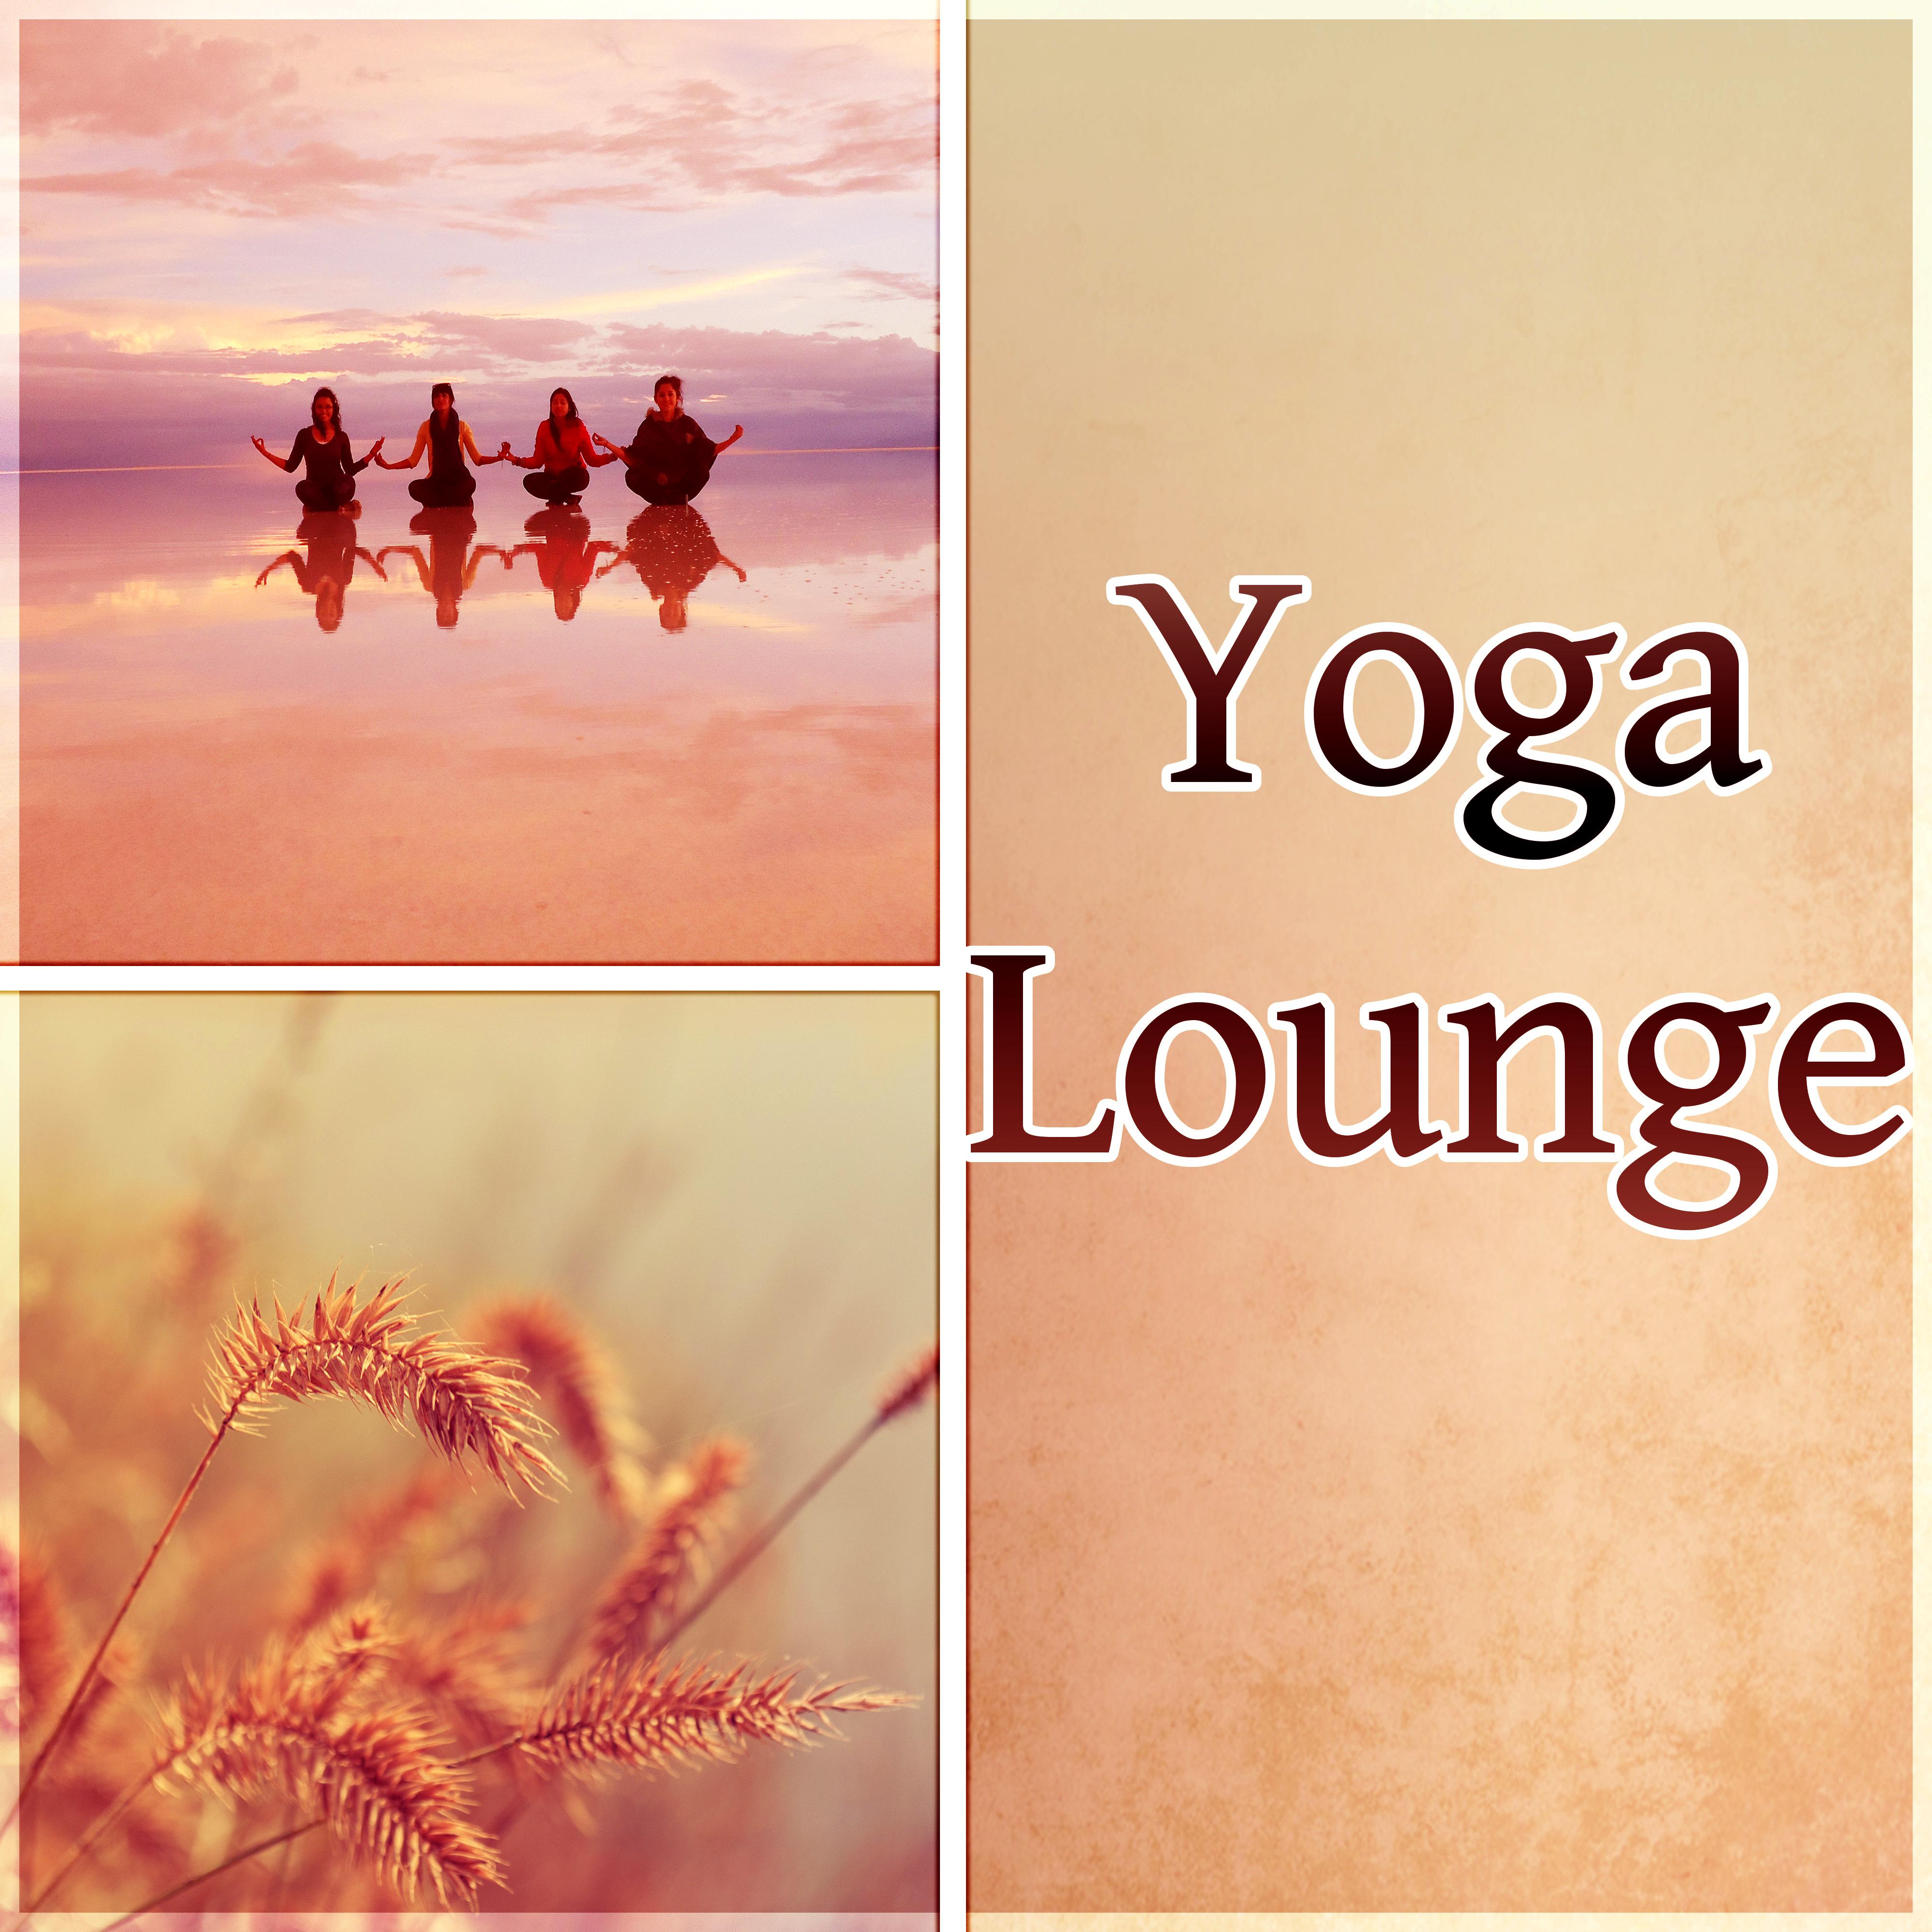 Yoga Lounge - Good Day with Relaxing Sounds & Sounds of Nature, Calm Background Music for Reduce Stress the Body & Mind, Wake Up, Positive Attitude to the World, Morning Coffee